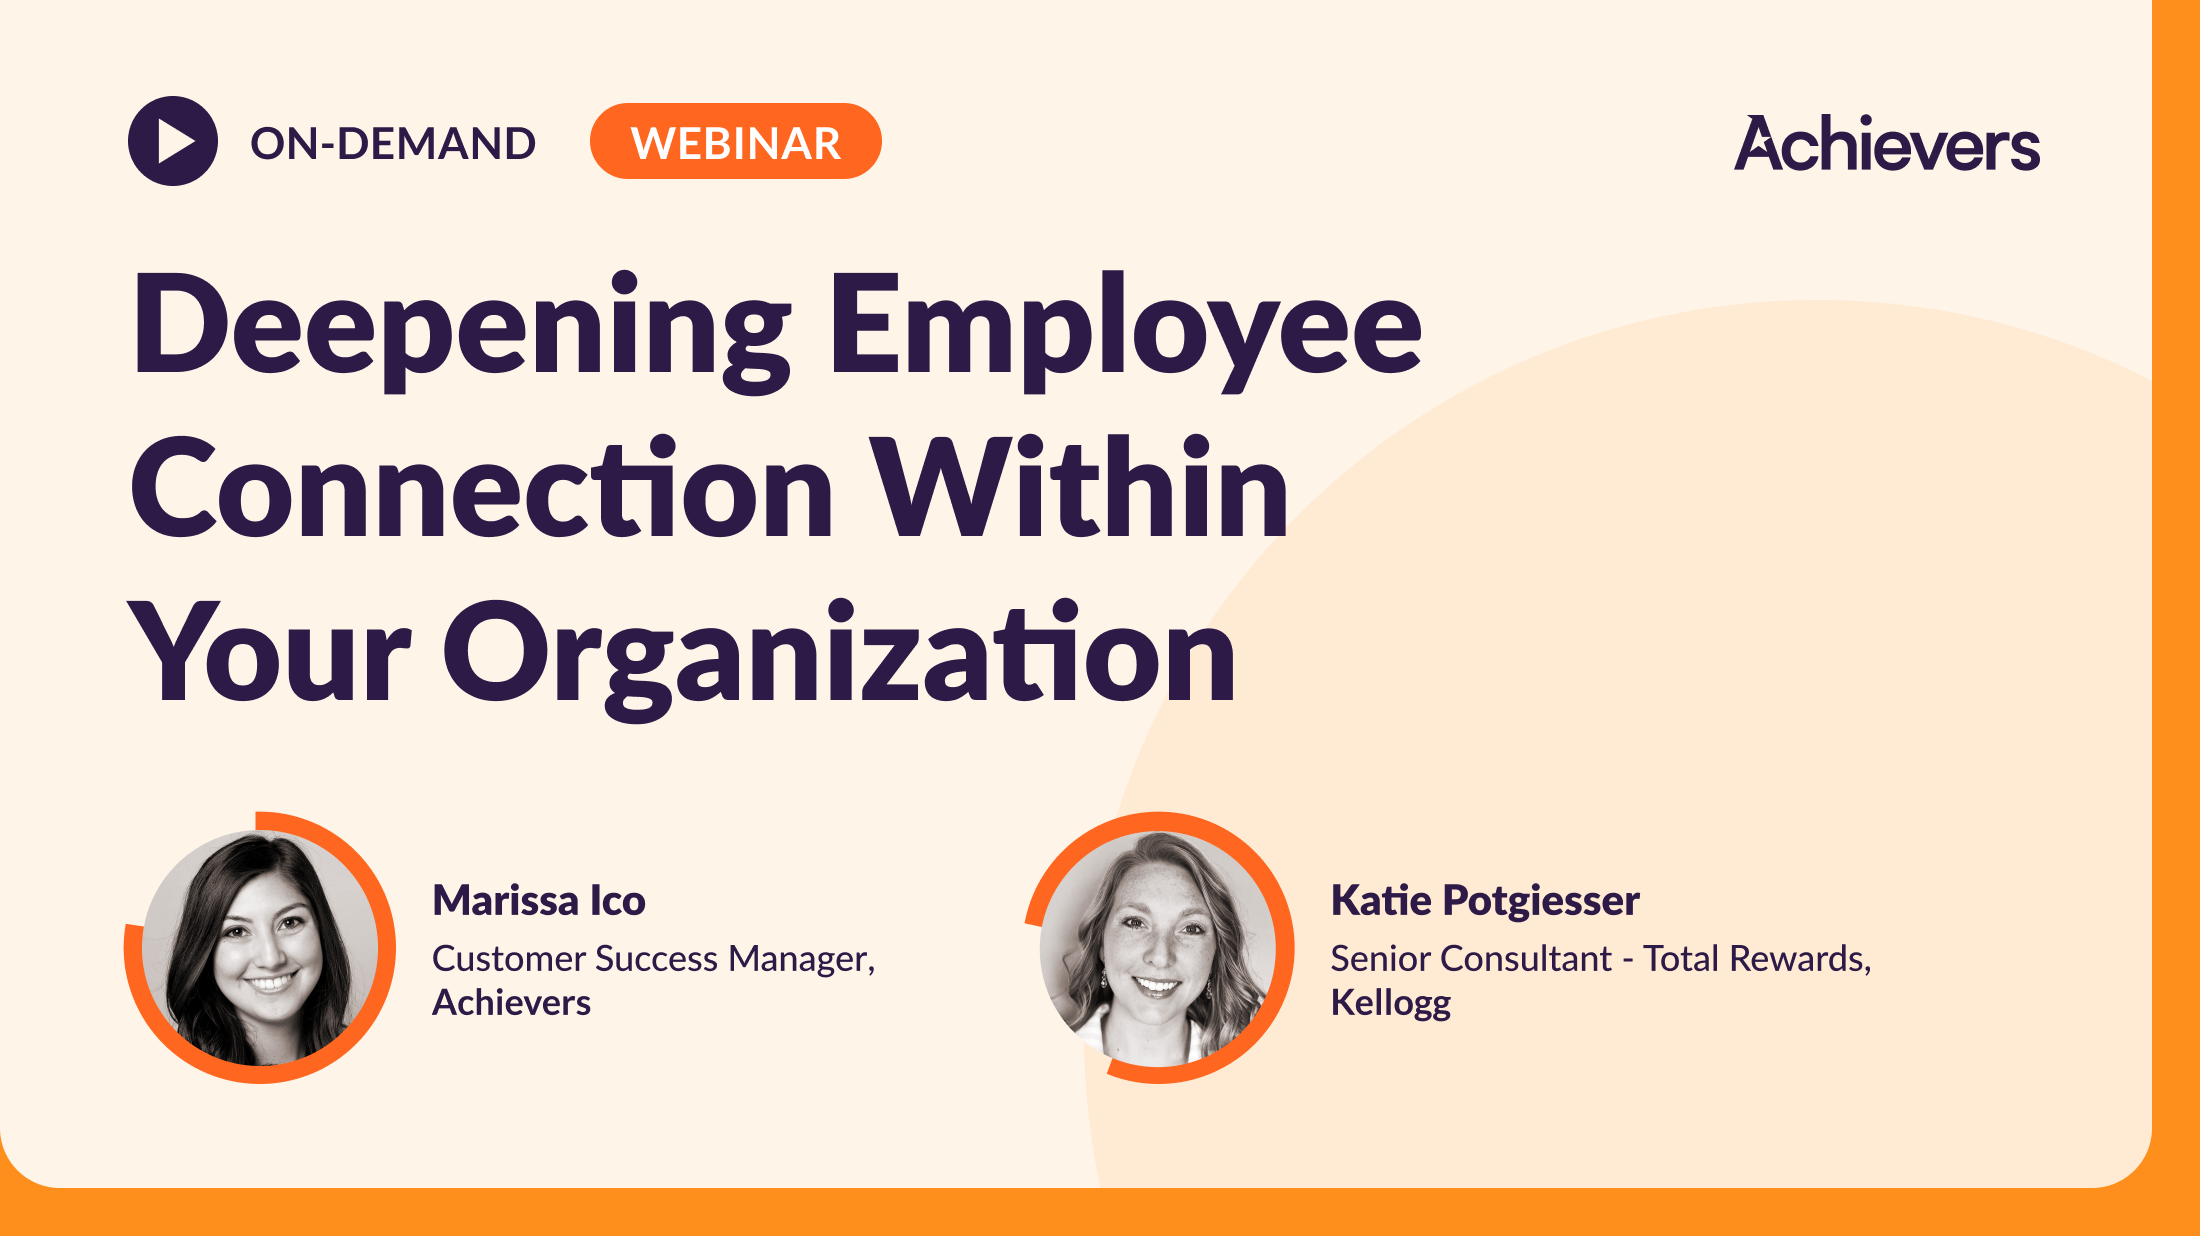 Deepening Employee Connection Within Your Organization